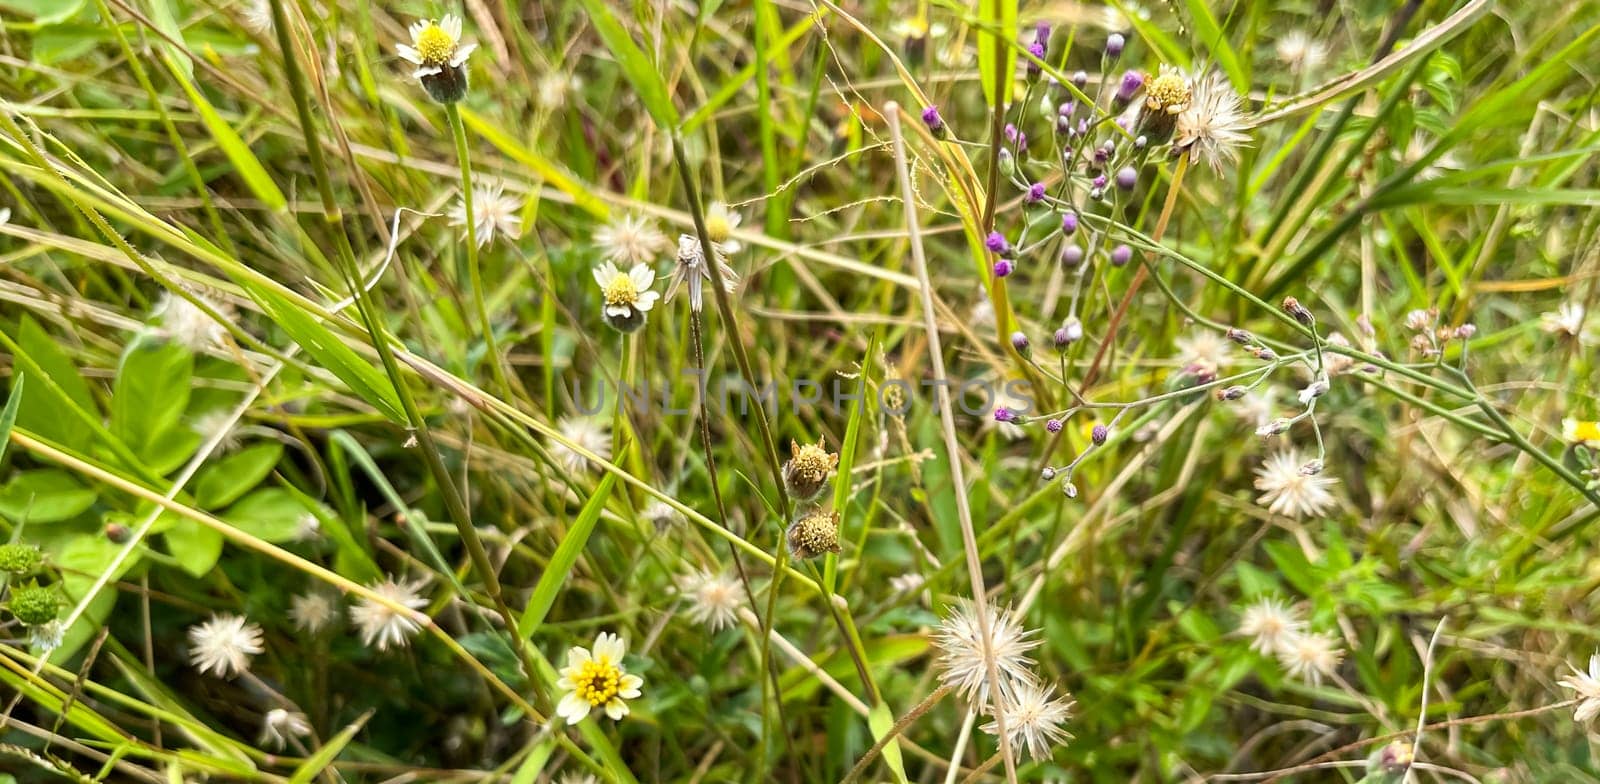 grassy flowers in the meadow